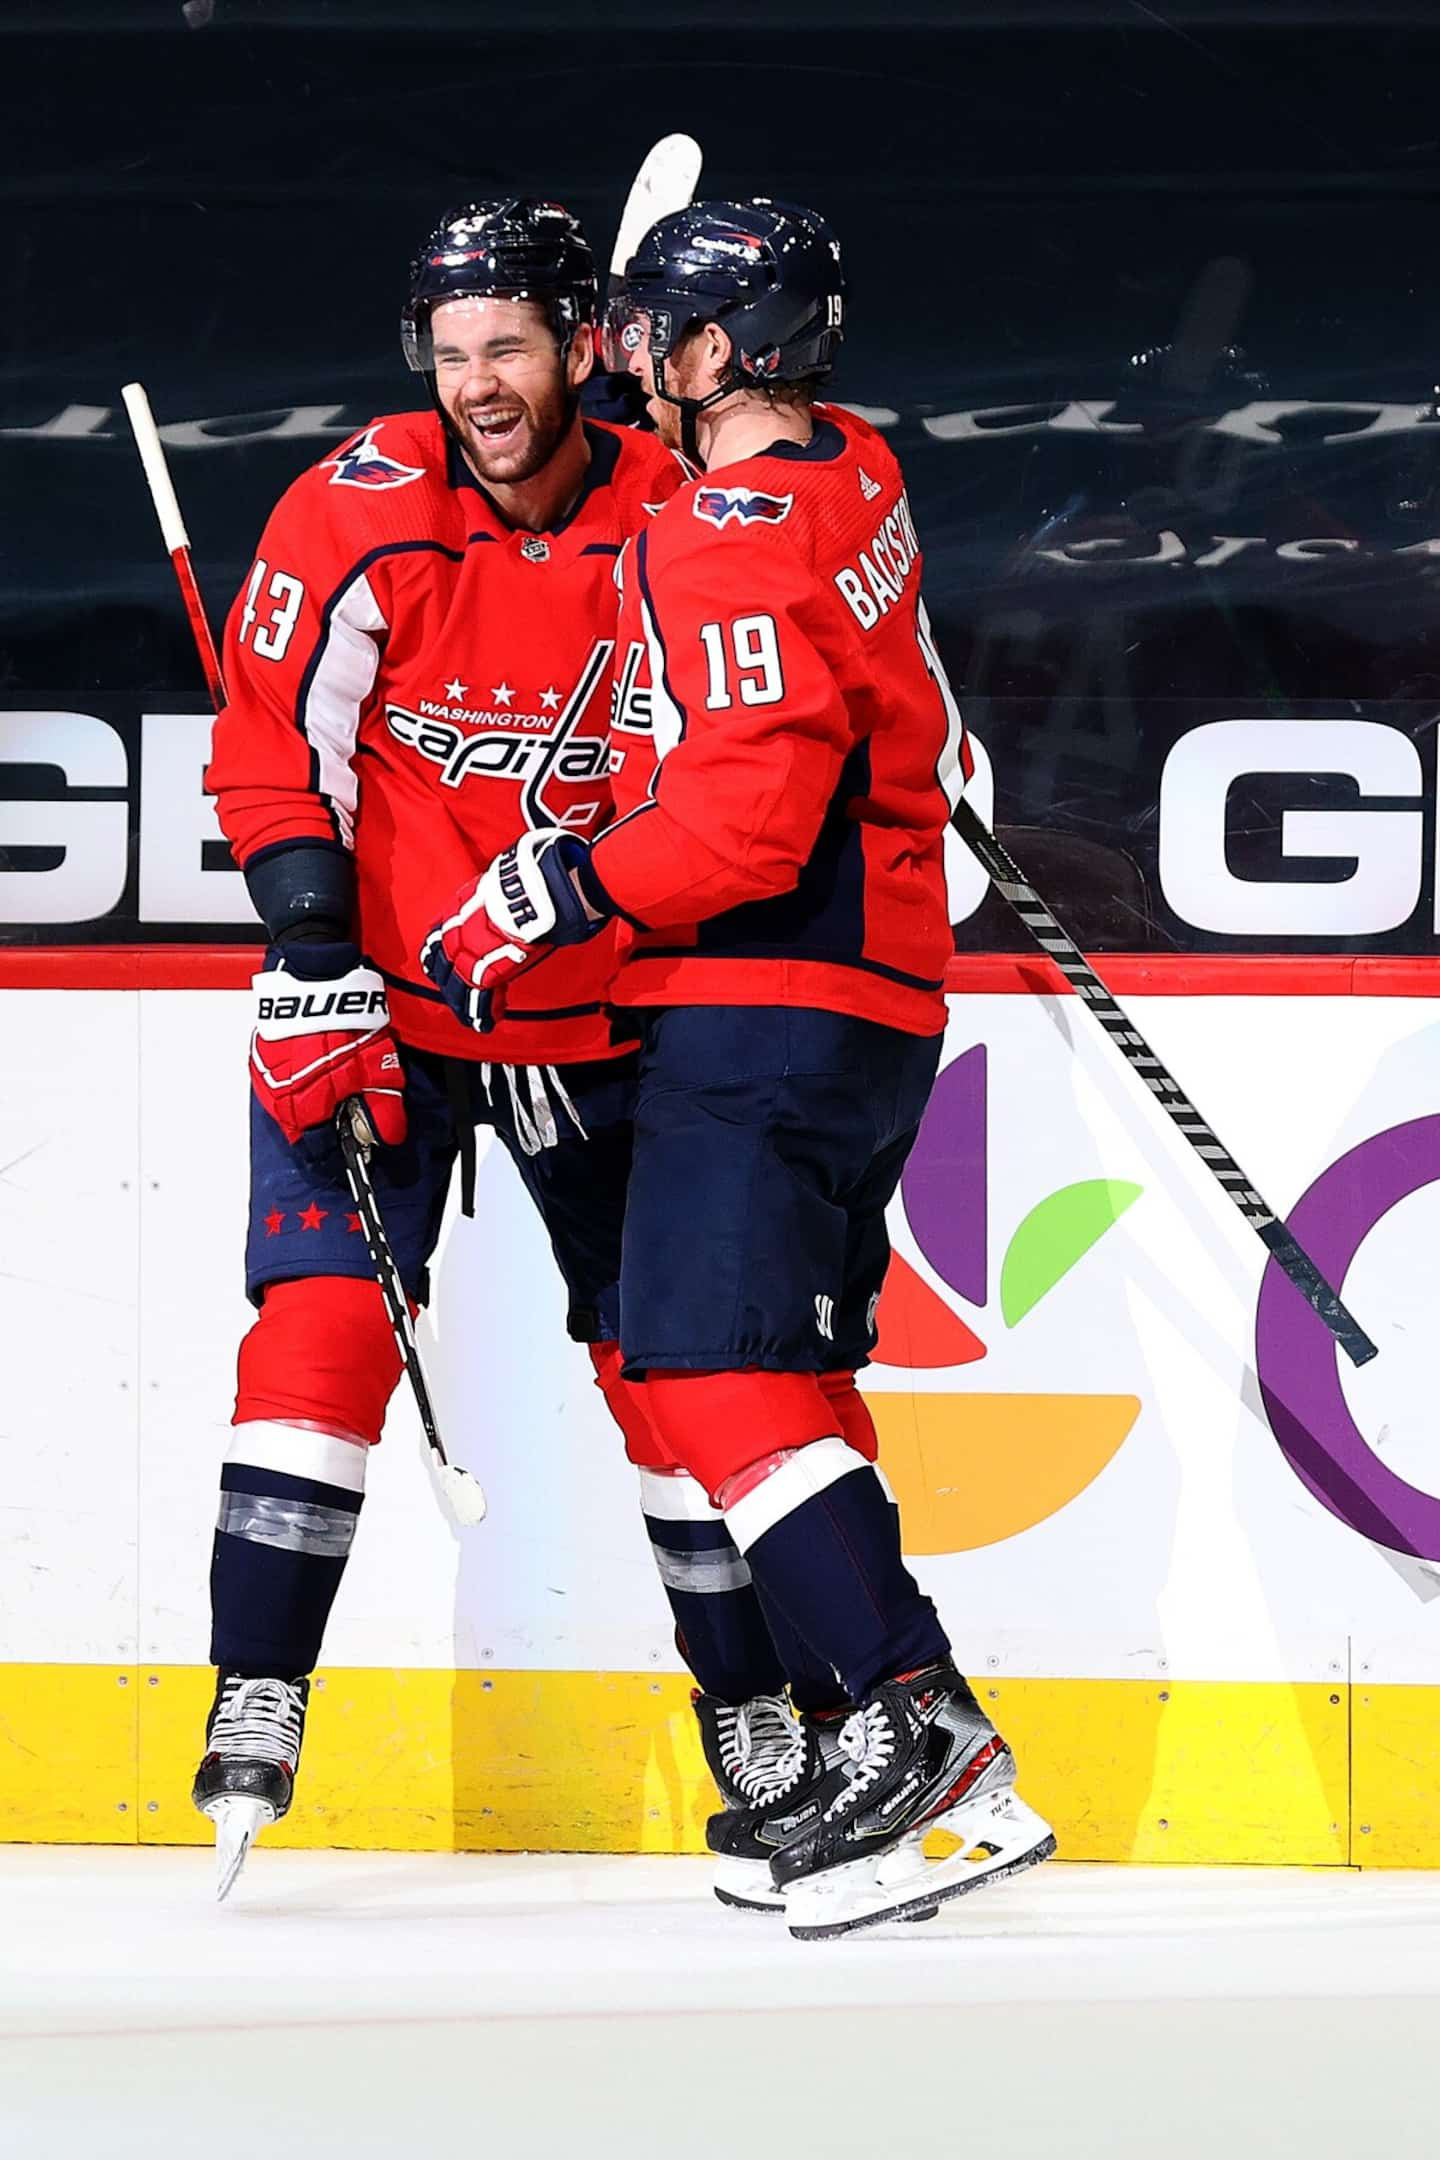 Soon big reinforcements for Alex Ovechkin